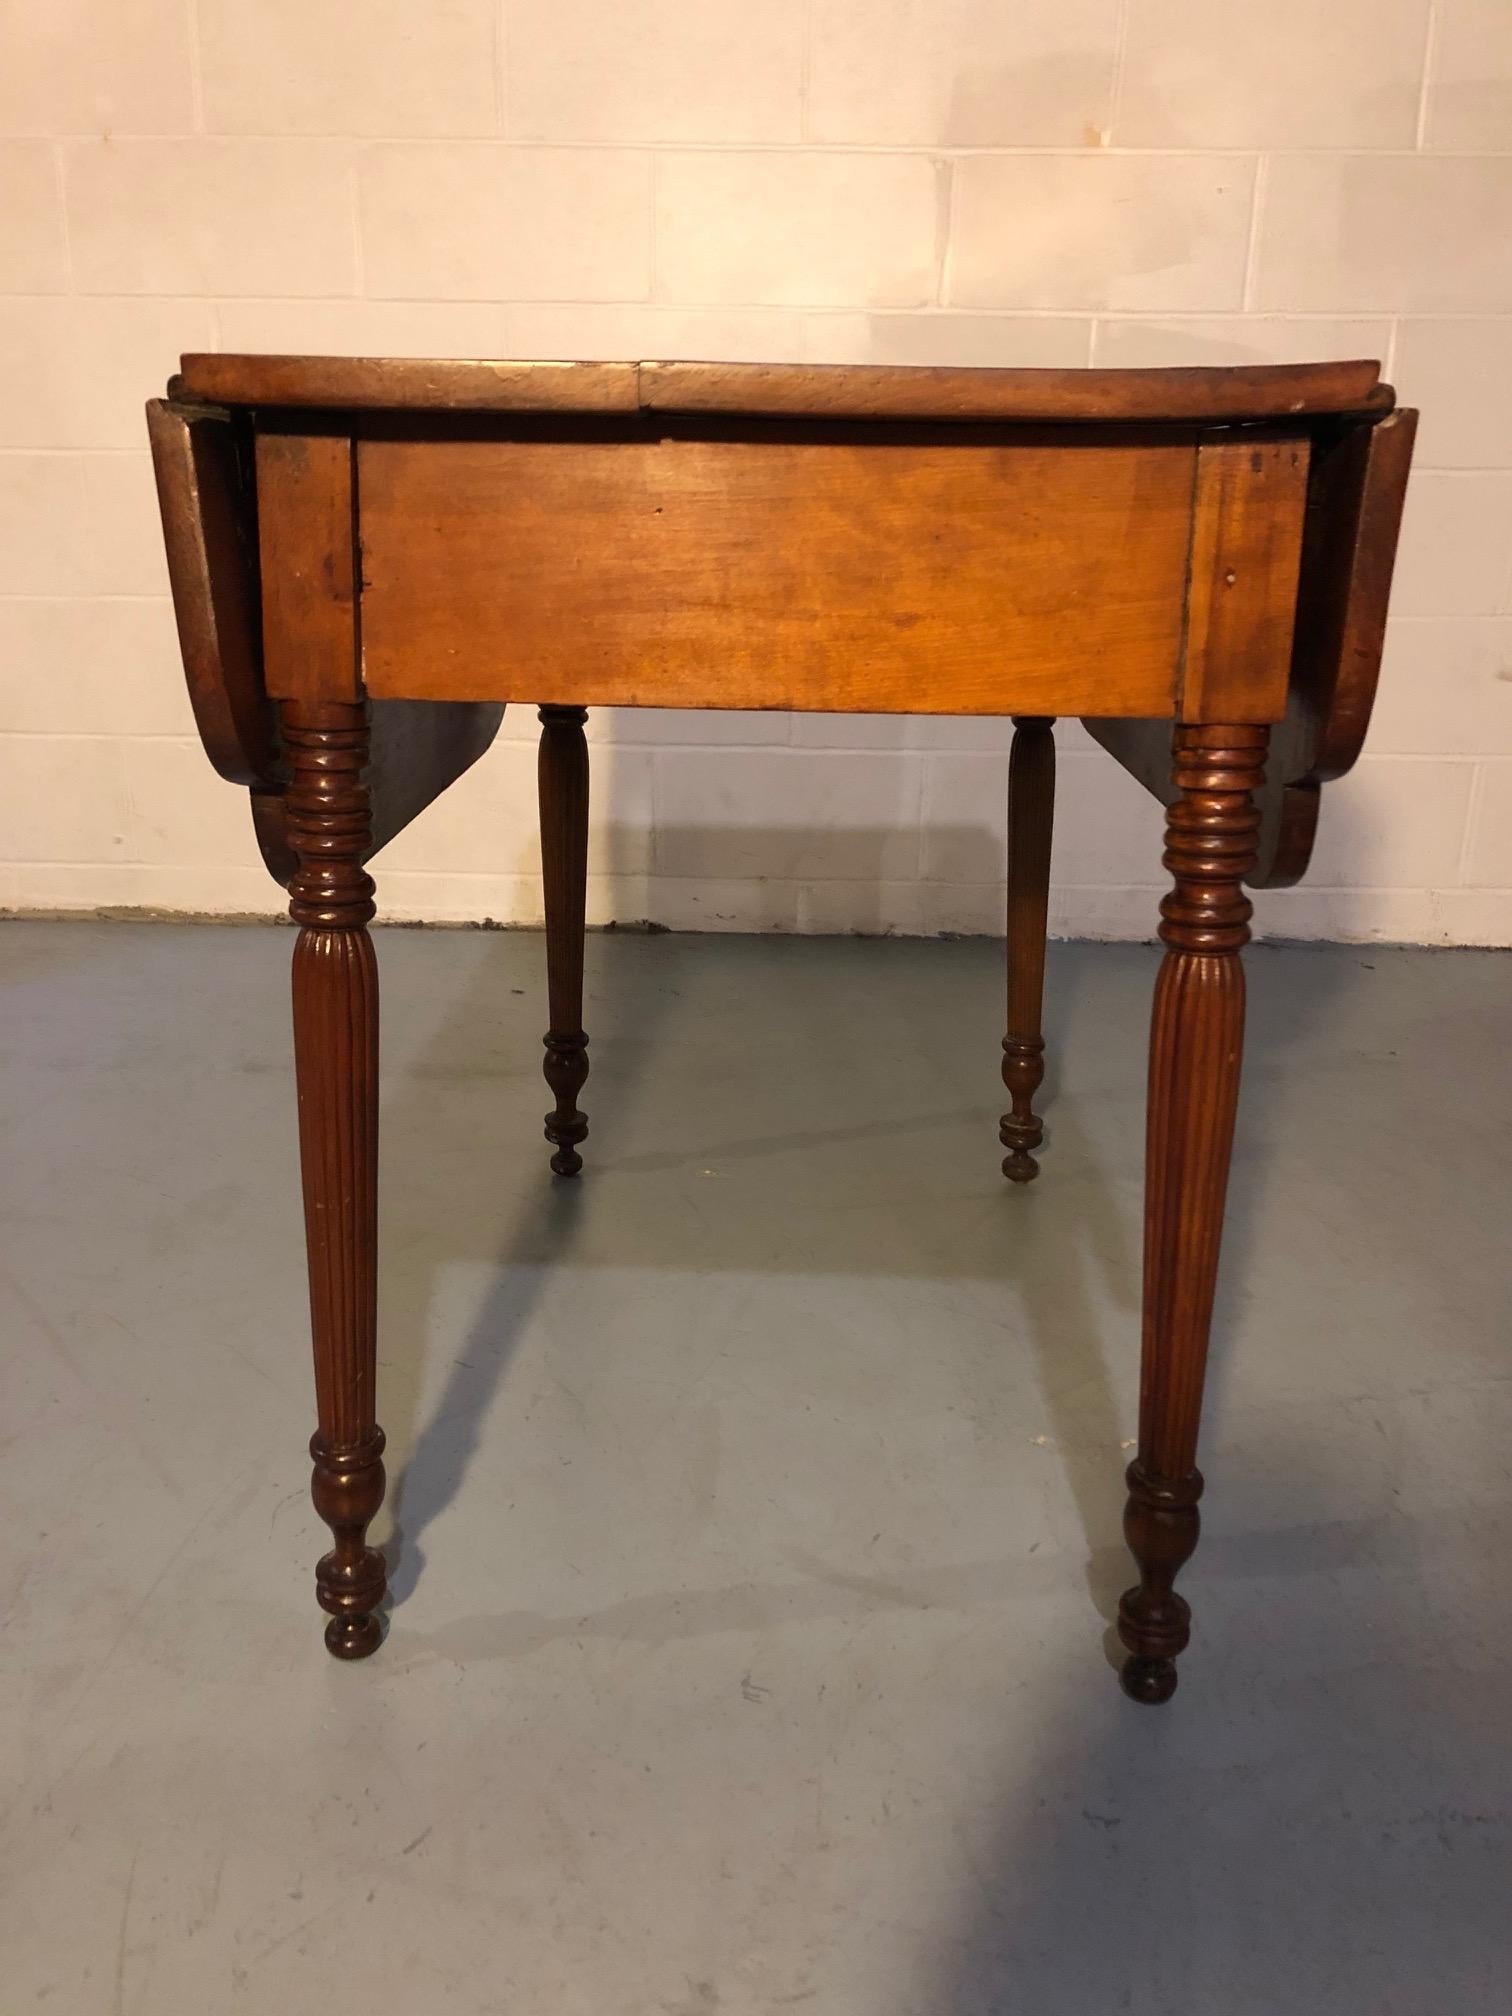 A handsome versatile cherry English drop-leaf table with lovely turned legs that's a great size for use as a small dining table or occasional table. 40” wide with the leaf’s extended. (Each leaf is 10” wide).
 